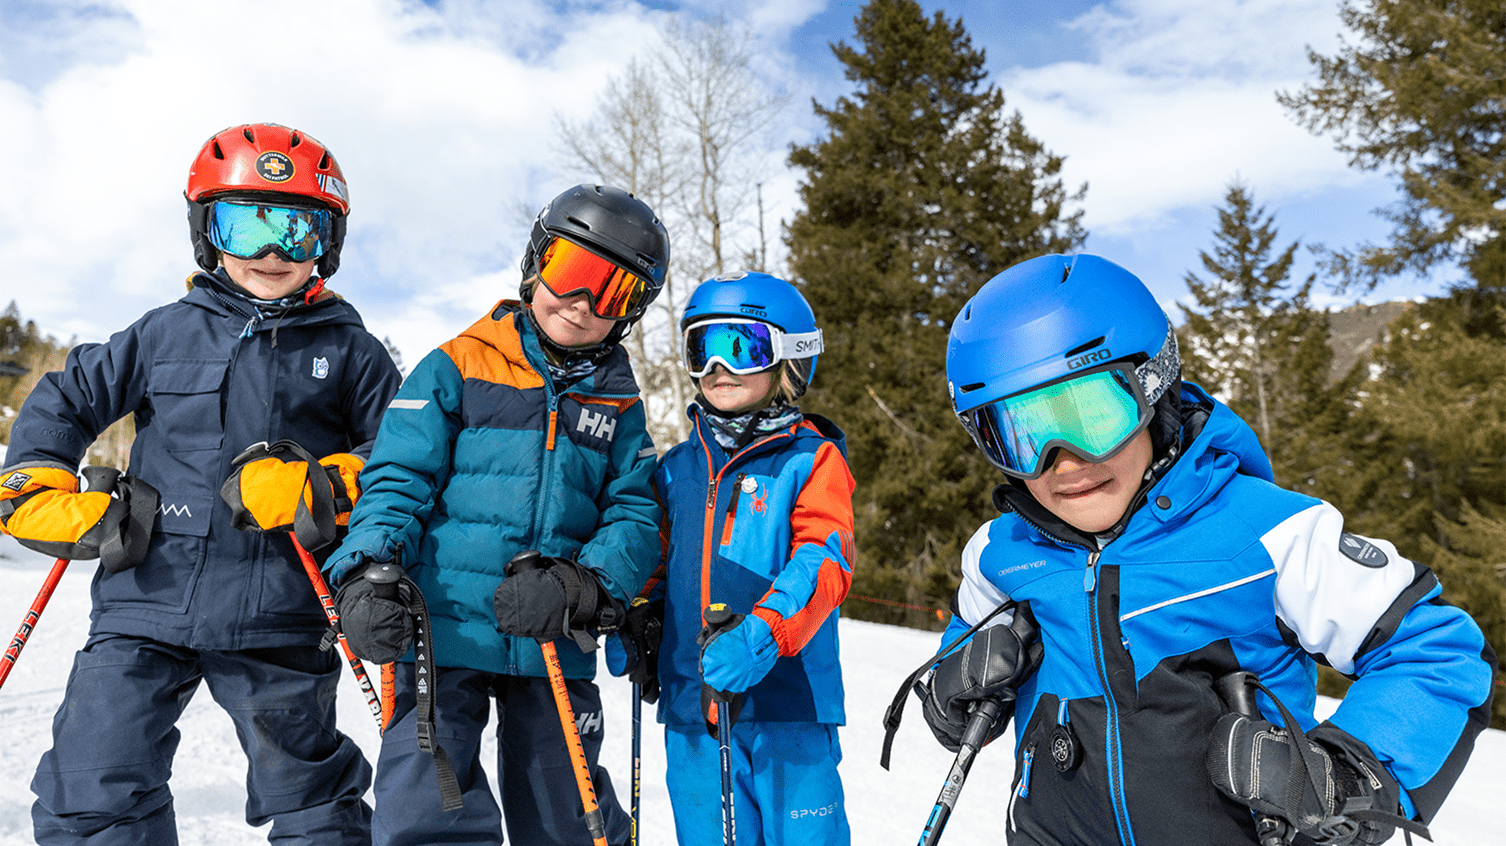 Four kids smile at the camera as they ski together on Aspen Highlands